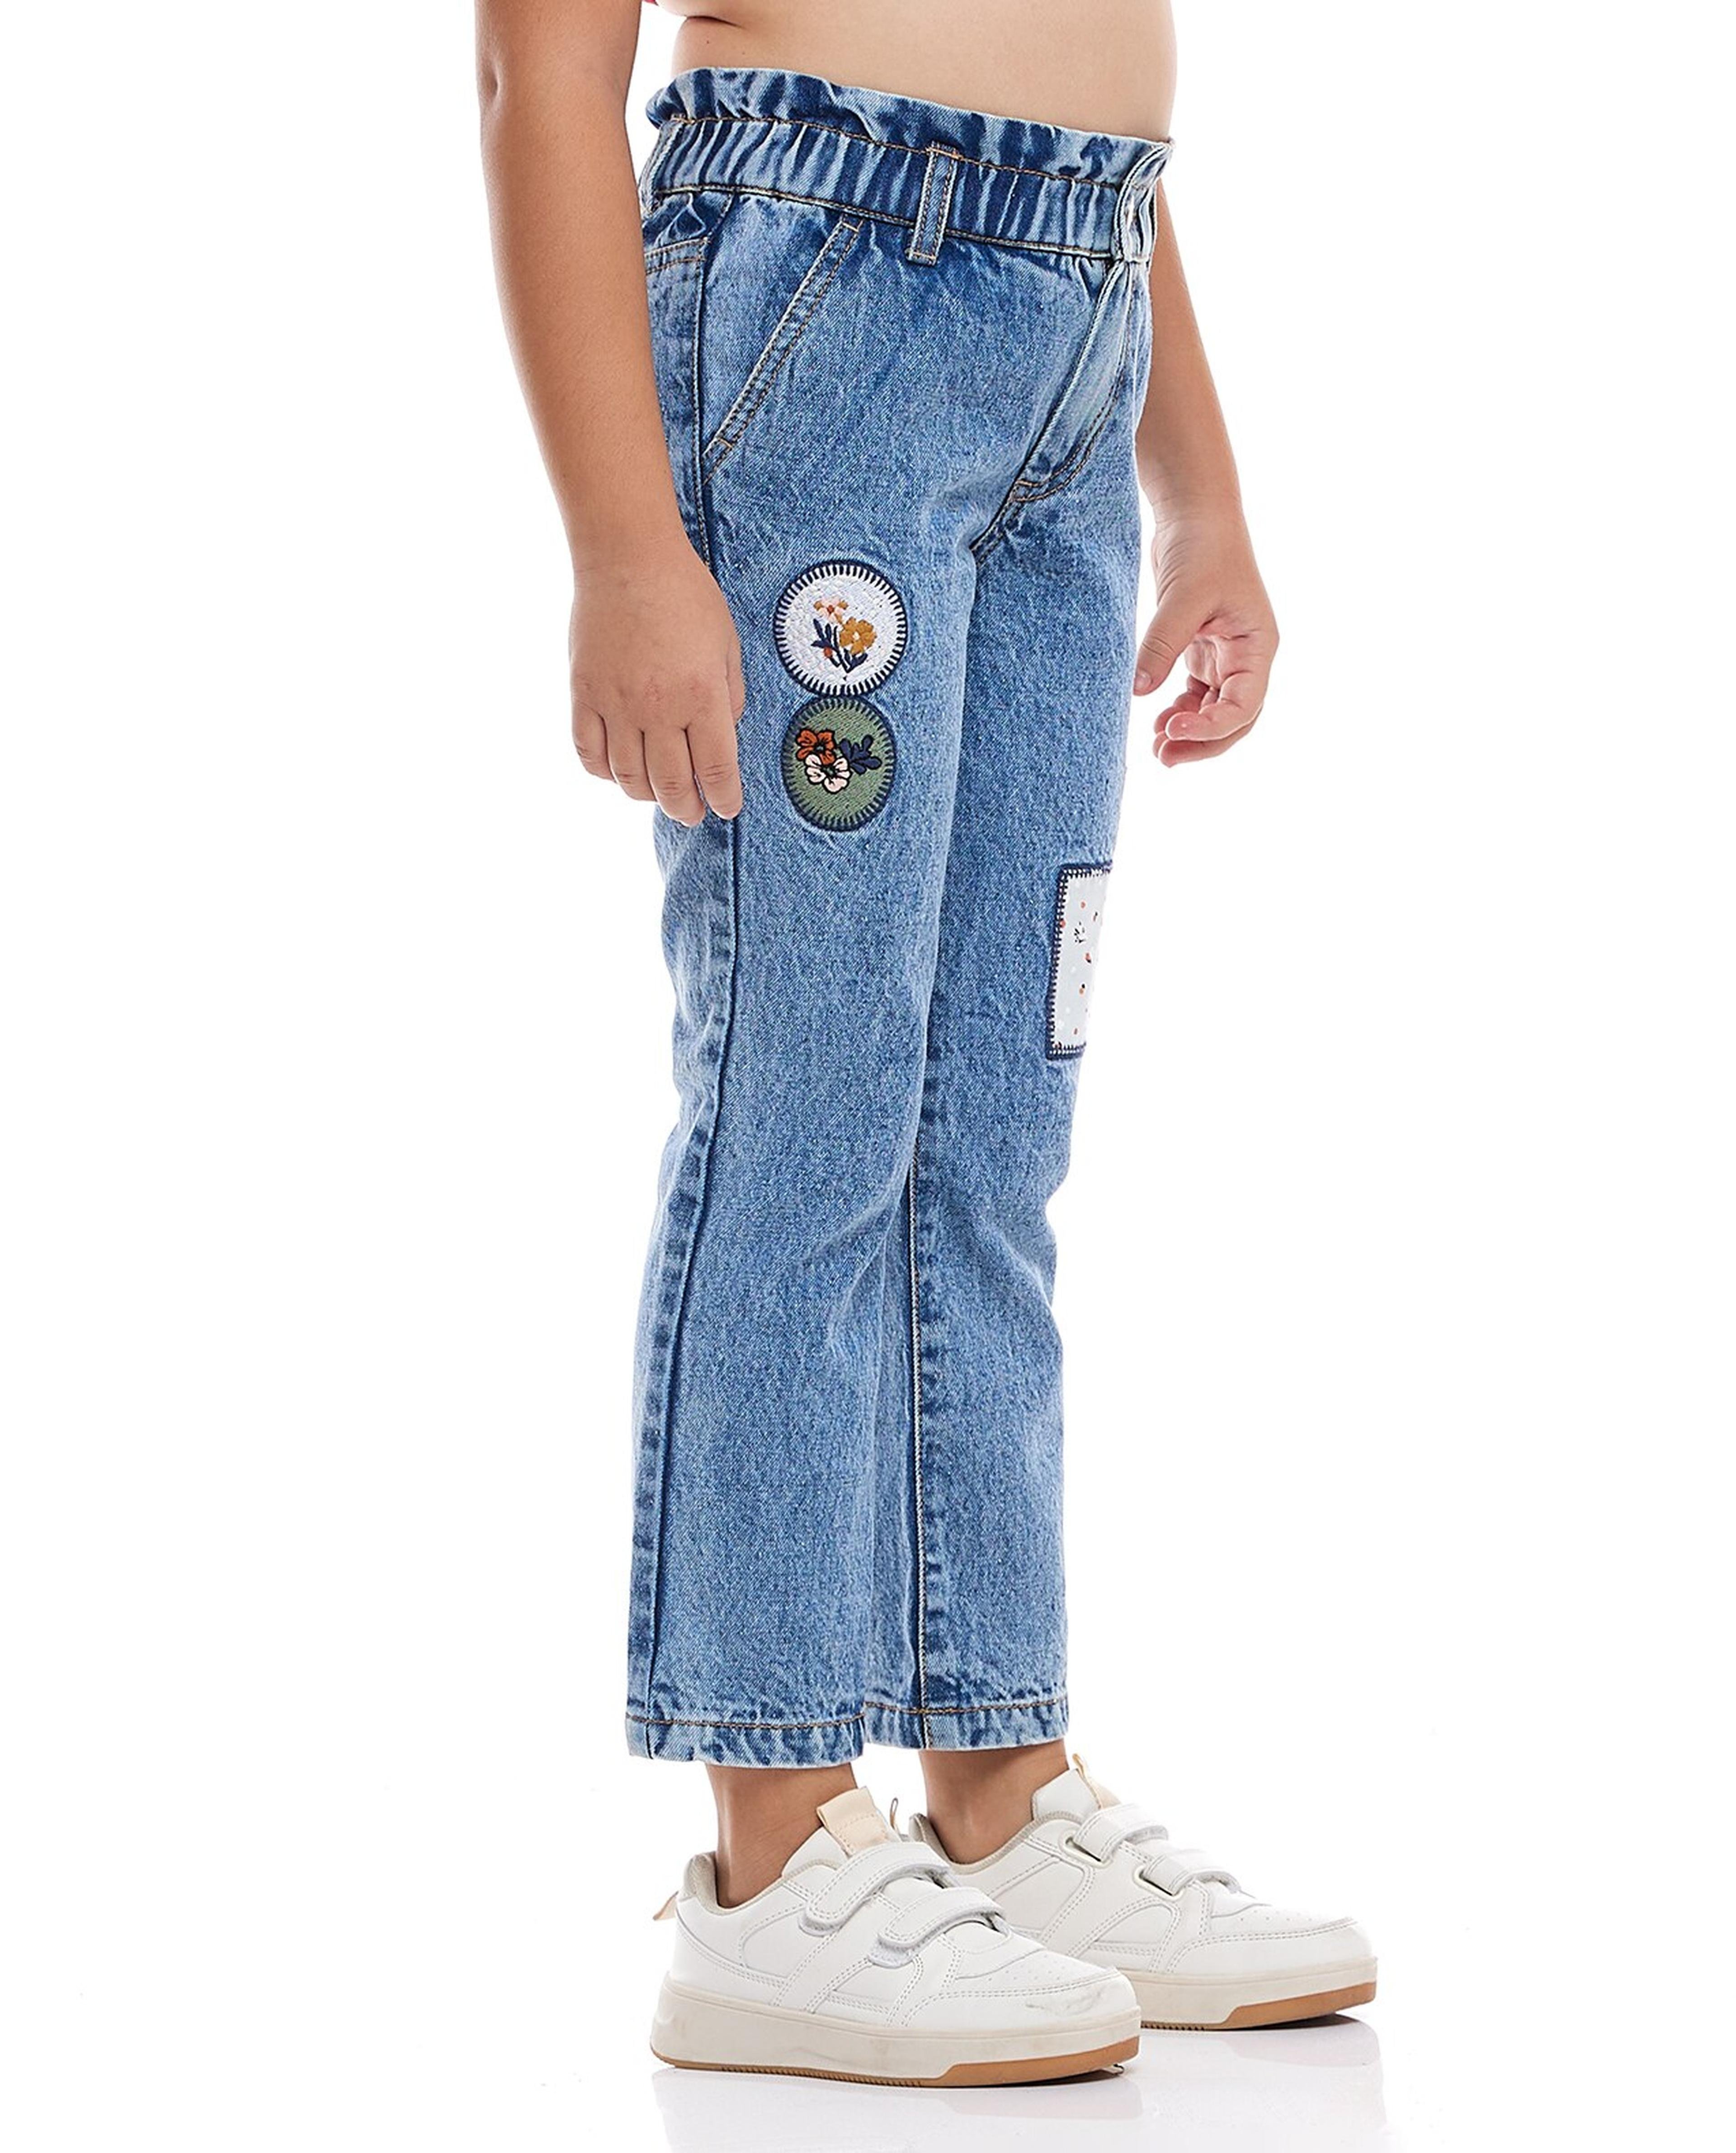 Applique Work Jeans with Button Closure